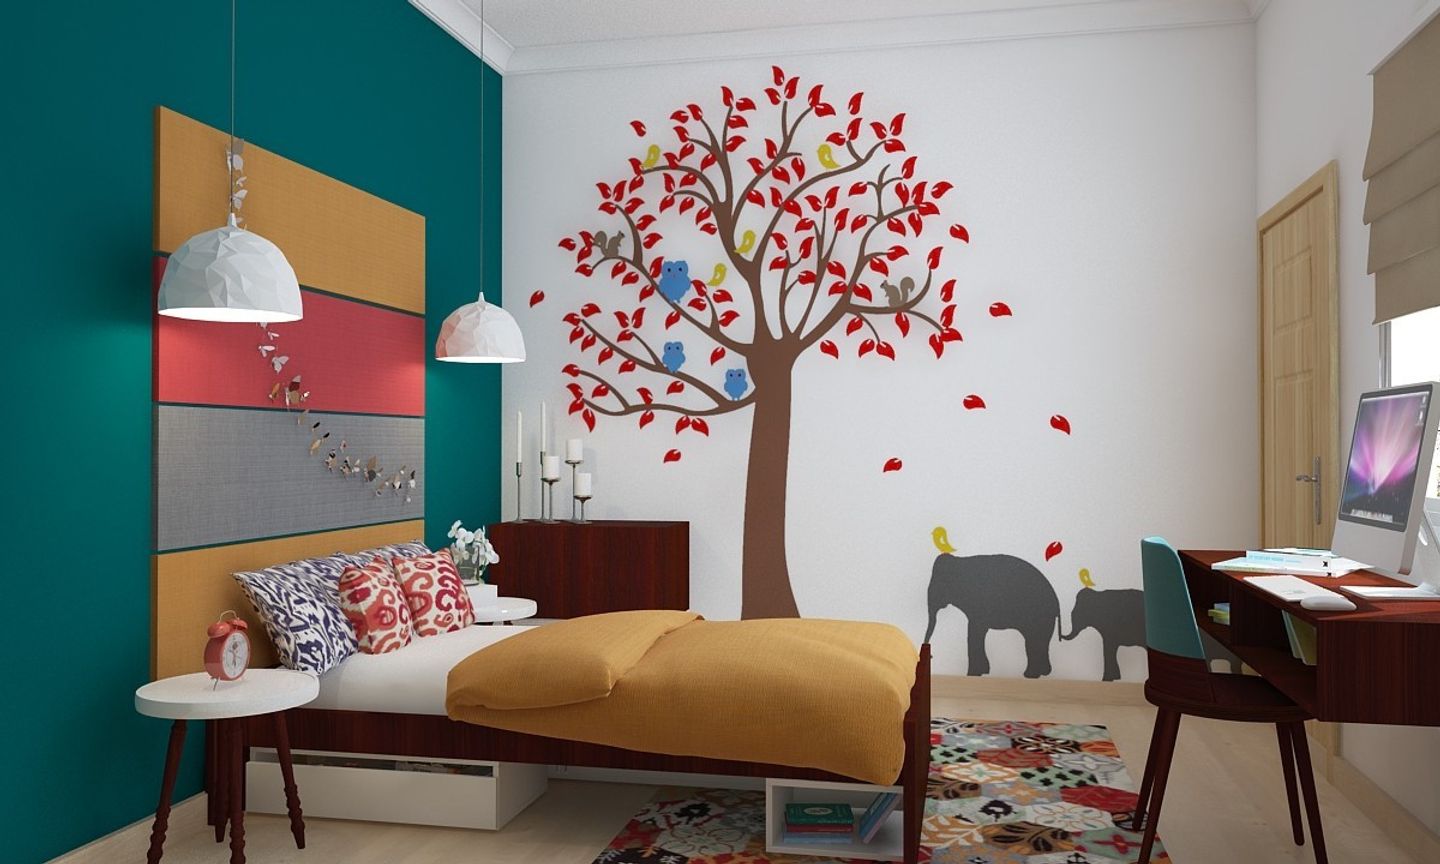 Compact Kid's Room Design With Peacock Green And Brown Interiors